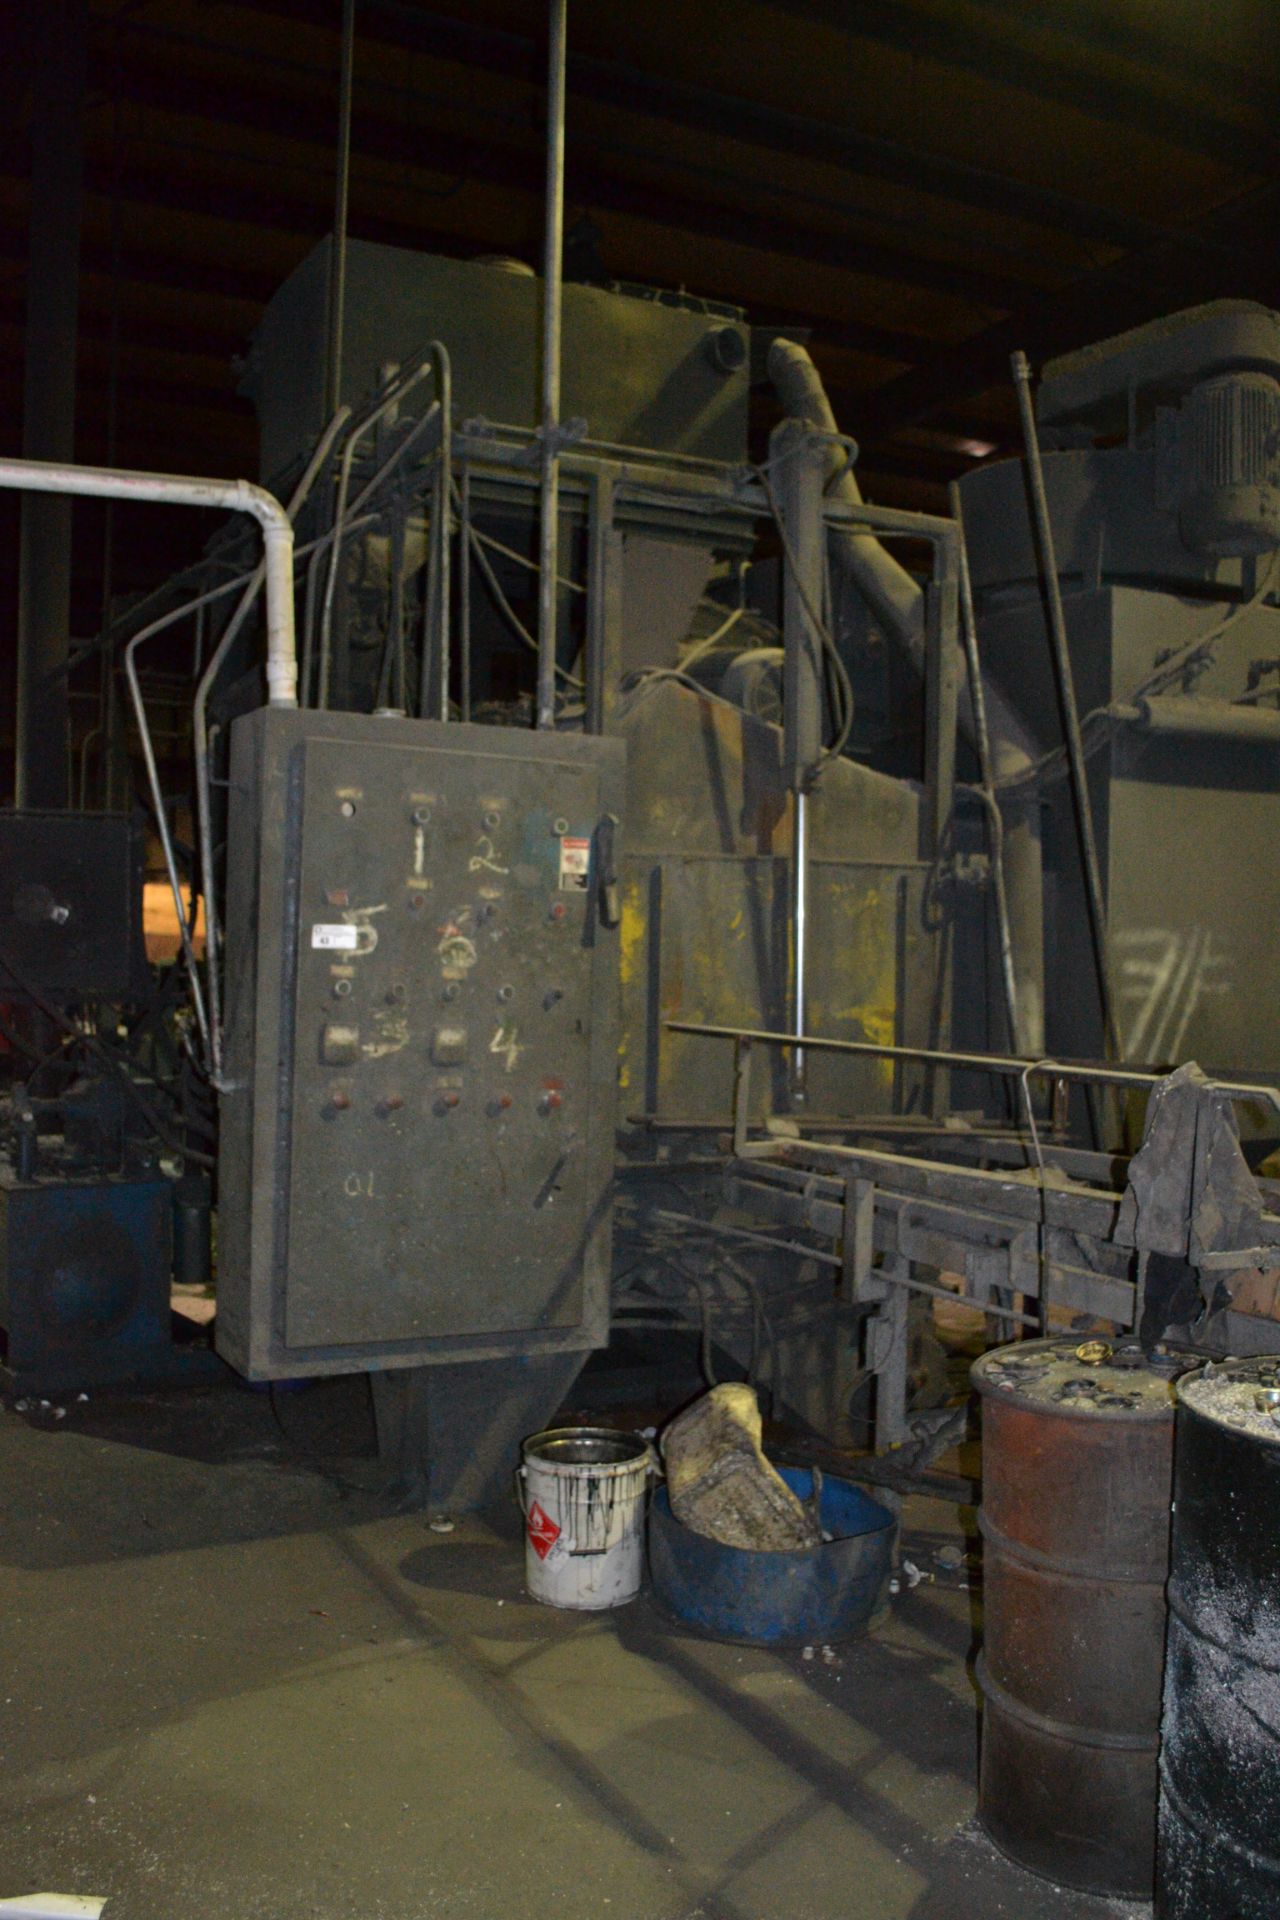 Roland Hydraulic Sandblaster Ohio EPA Comment - Any waste inside the unit must be evaluated using